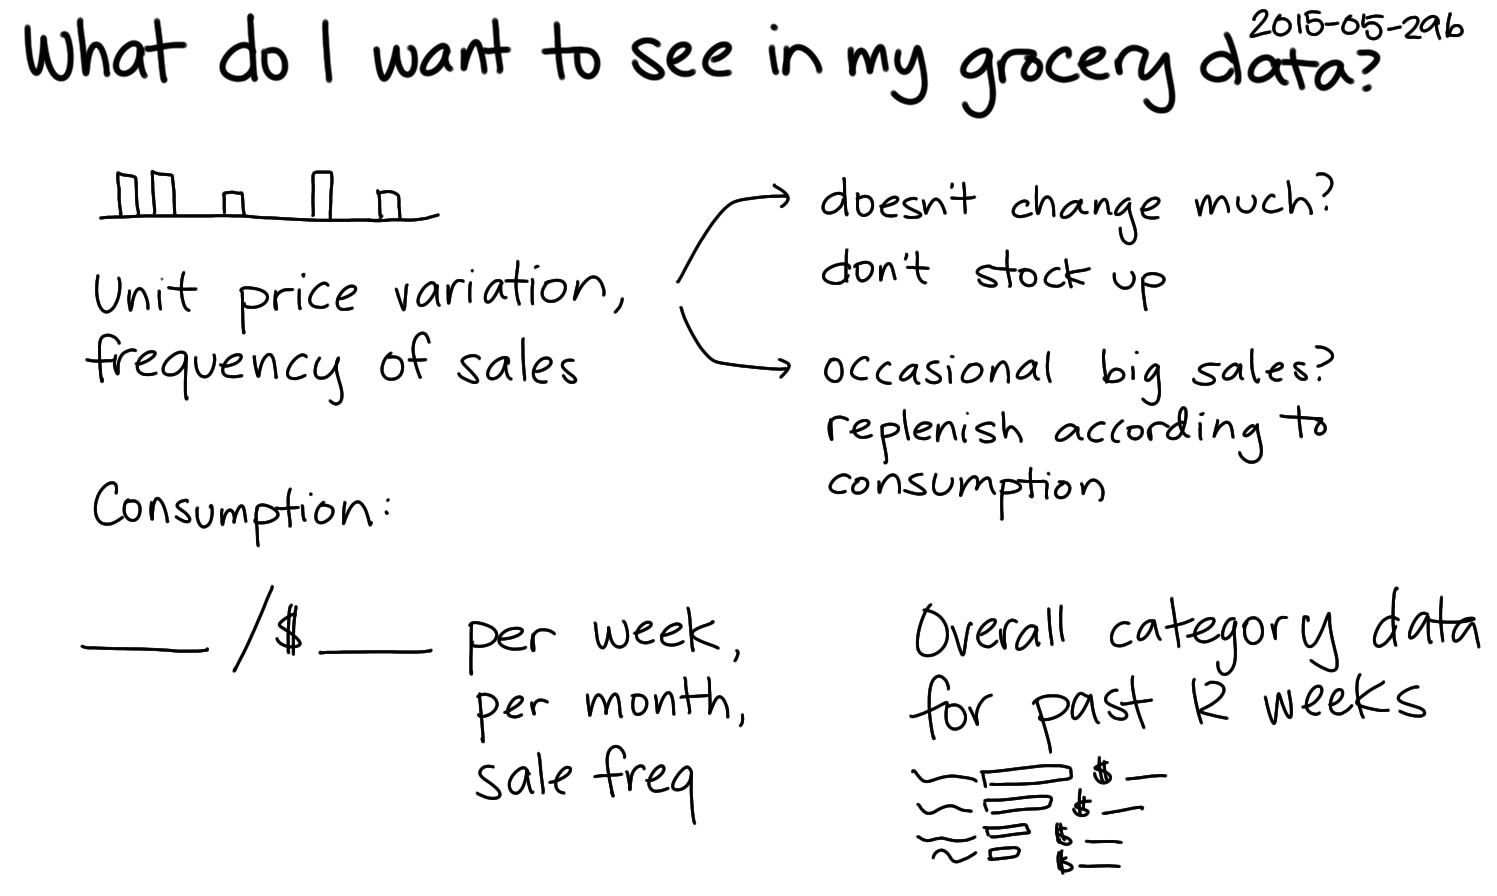 2015-05-29b What do I want to see in my grocery data -- index card #quantified #groceries.png